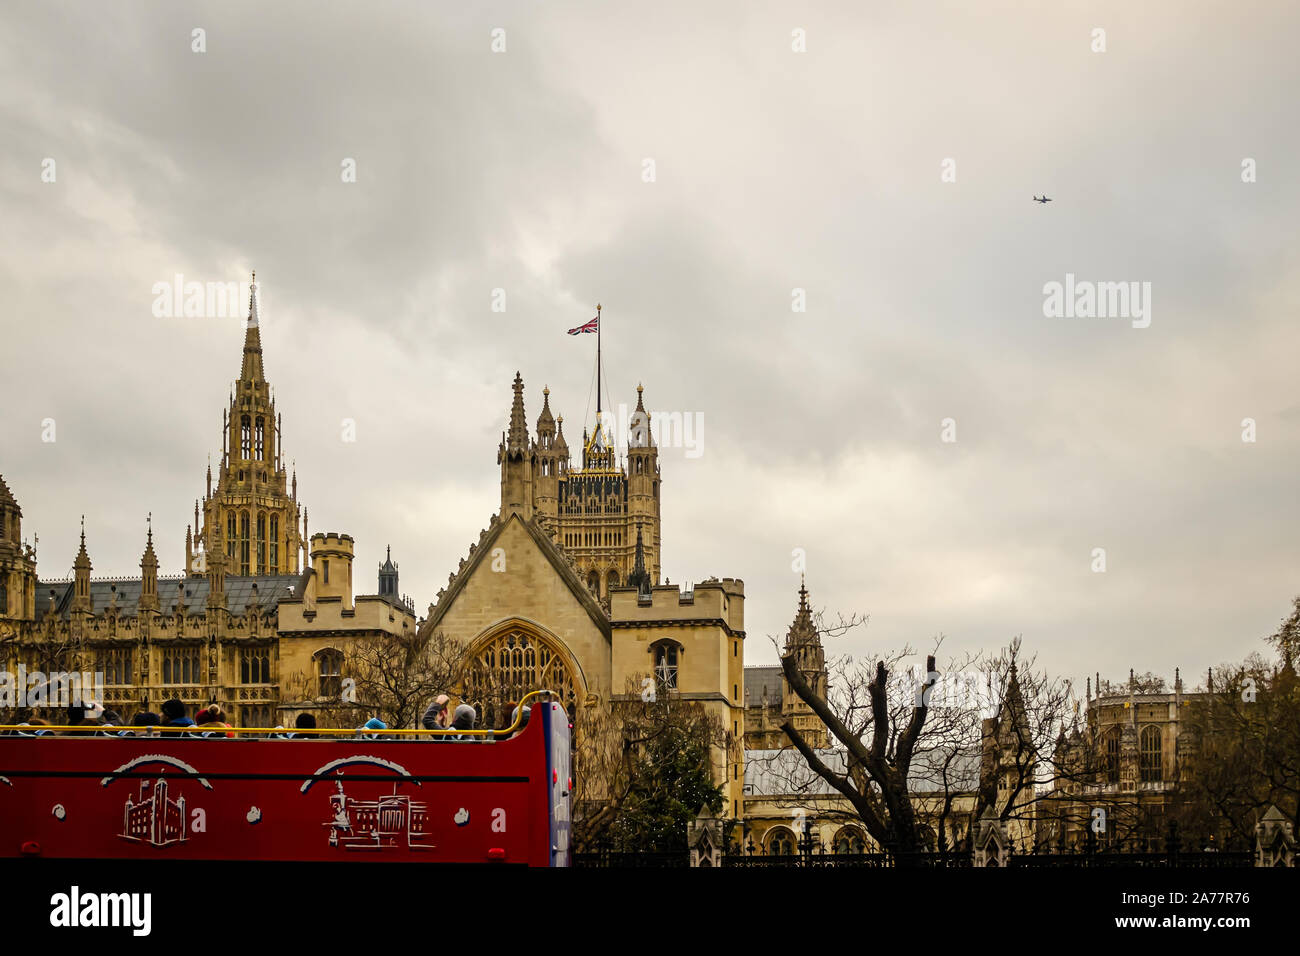 sightseeing bus passes the 'Houses of Parliament' in London, UK Stock Photo